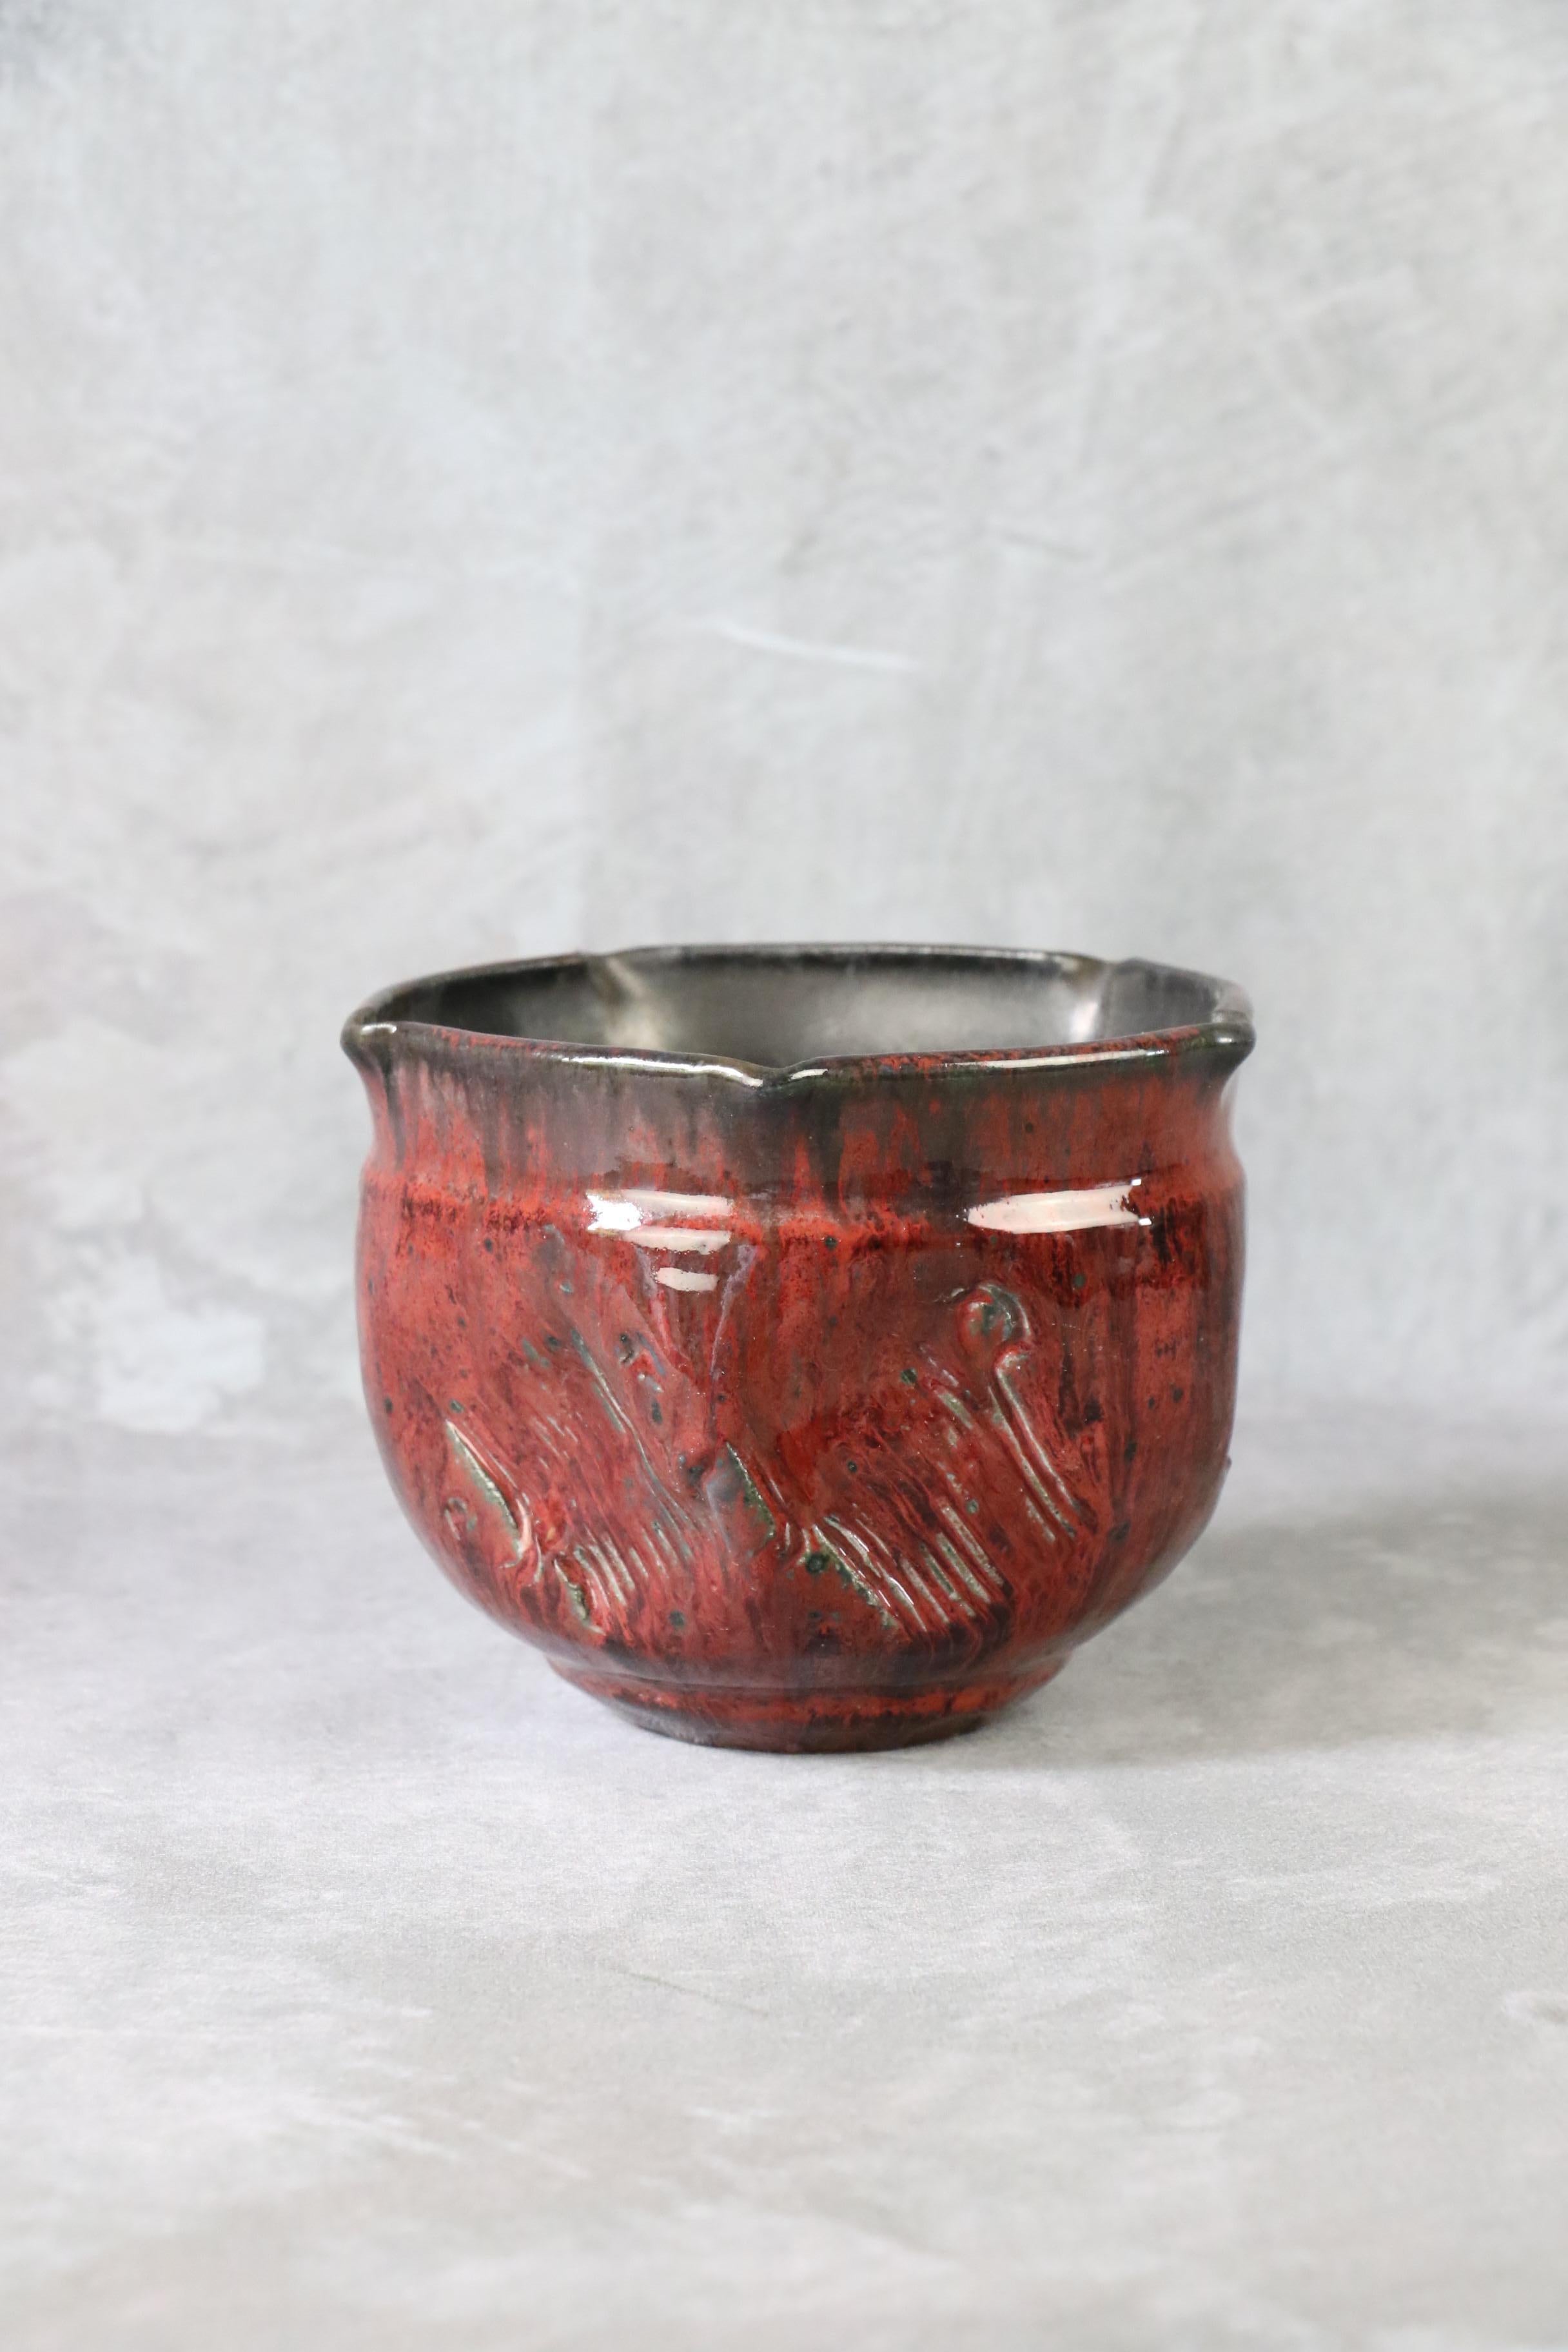 Vase by Alain Gaudebert, Puisaye - Era Joulia Debril Deblander - La Borne

A superb blood-red vase, scarified on the outside, with a serrated neck and a smooth matt black glaze on the inside. 
The piece is in very good condition and signed under the